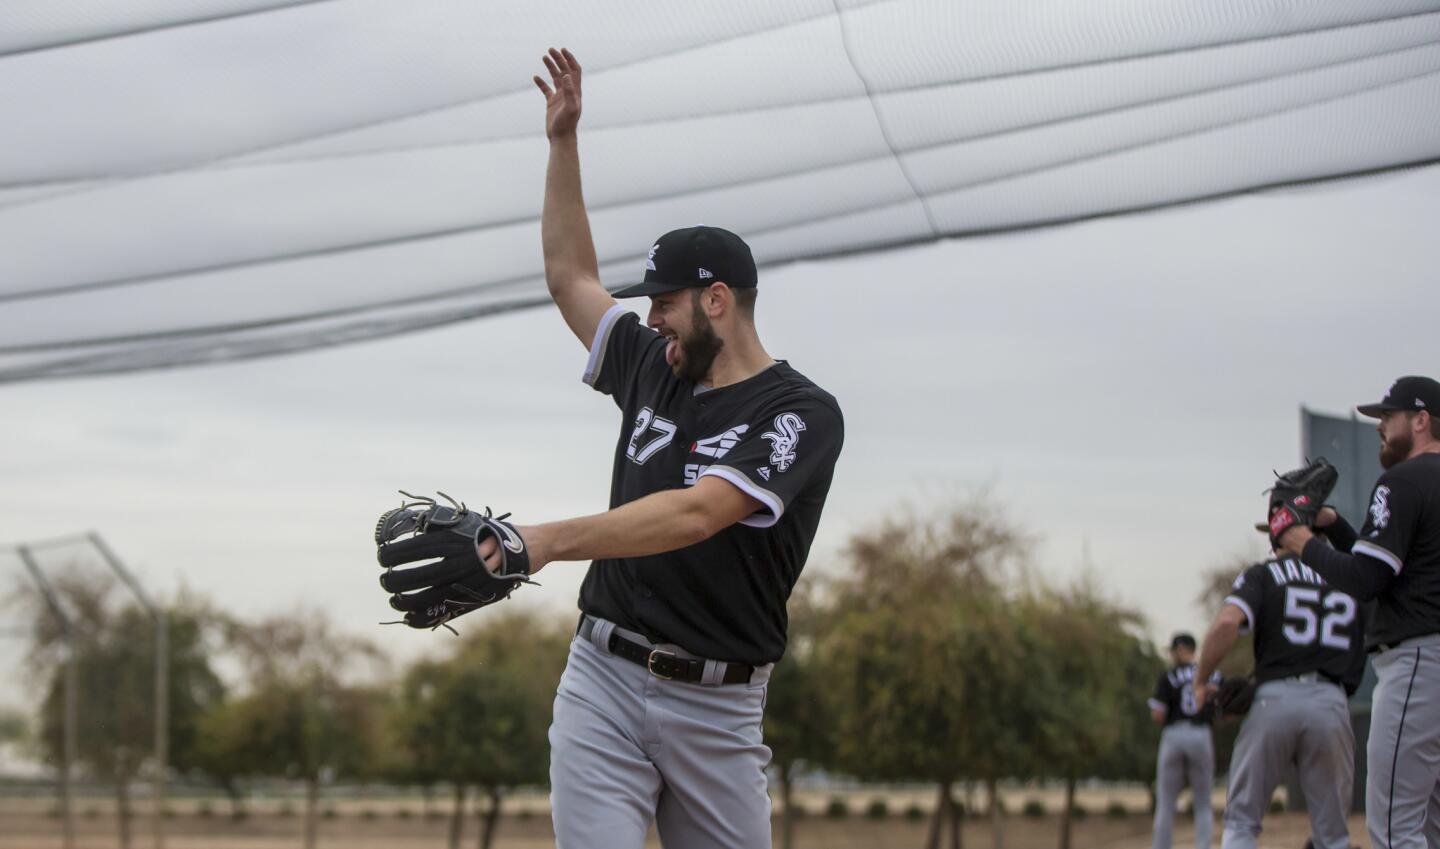 White Sox pitcher Lucas Giolito throws Feb. 14, 2019, during spring training in Glendale, Ariz.